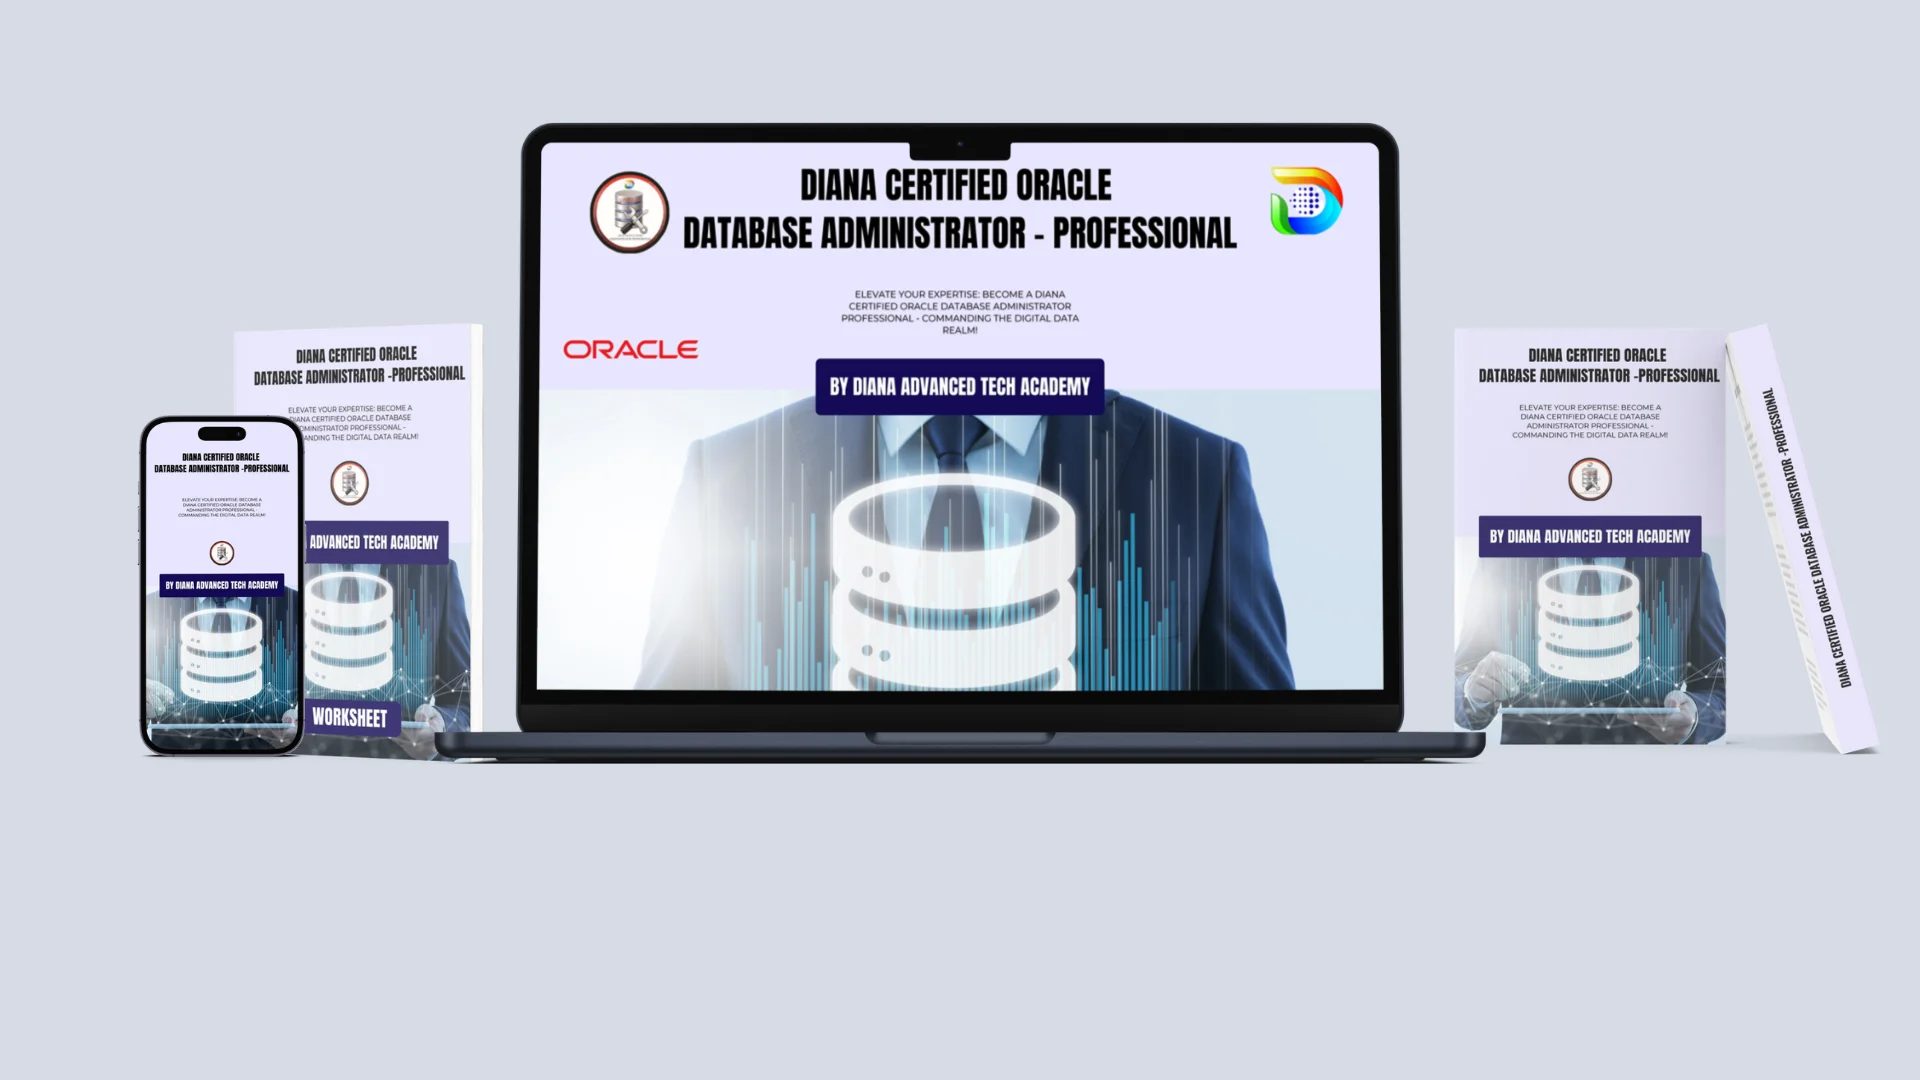 Diana Certified Oracle Database Administrator – Professional